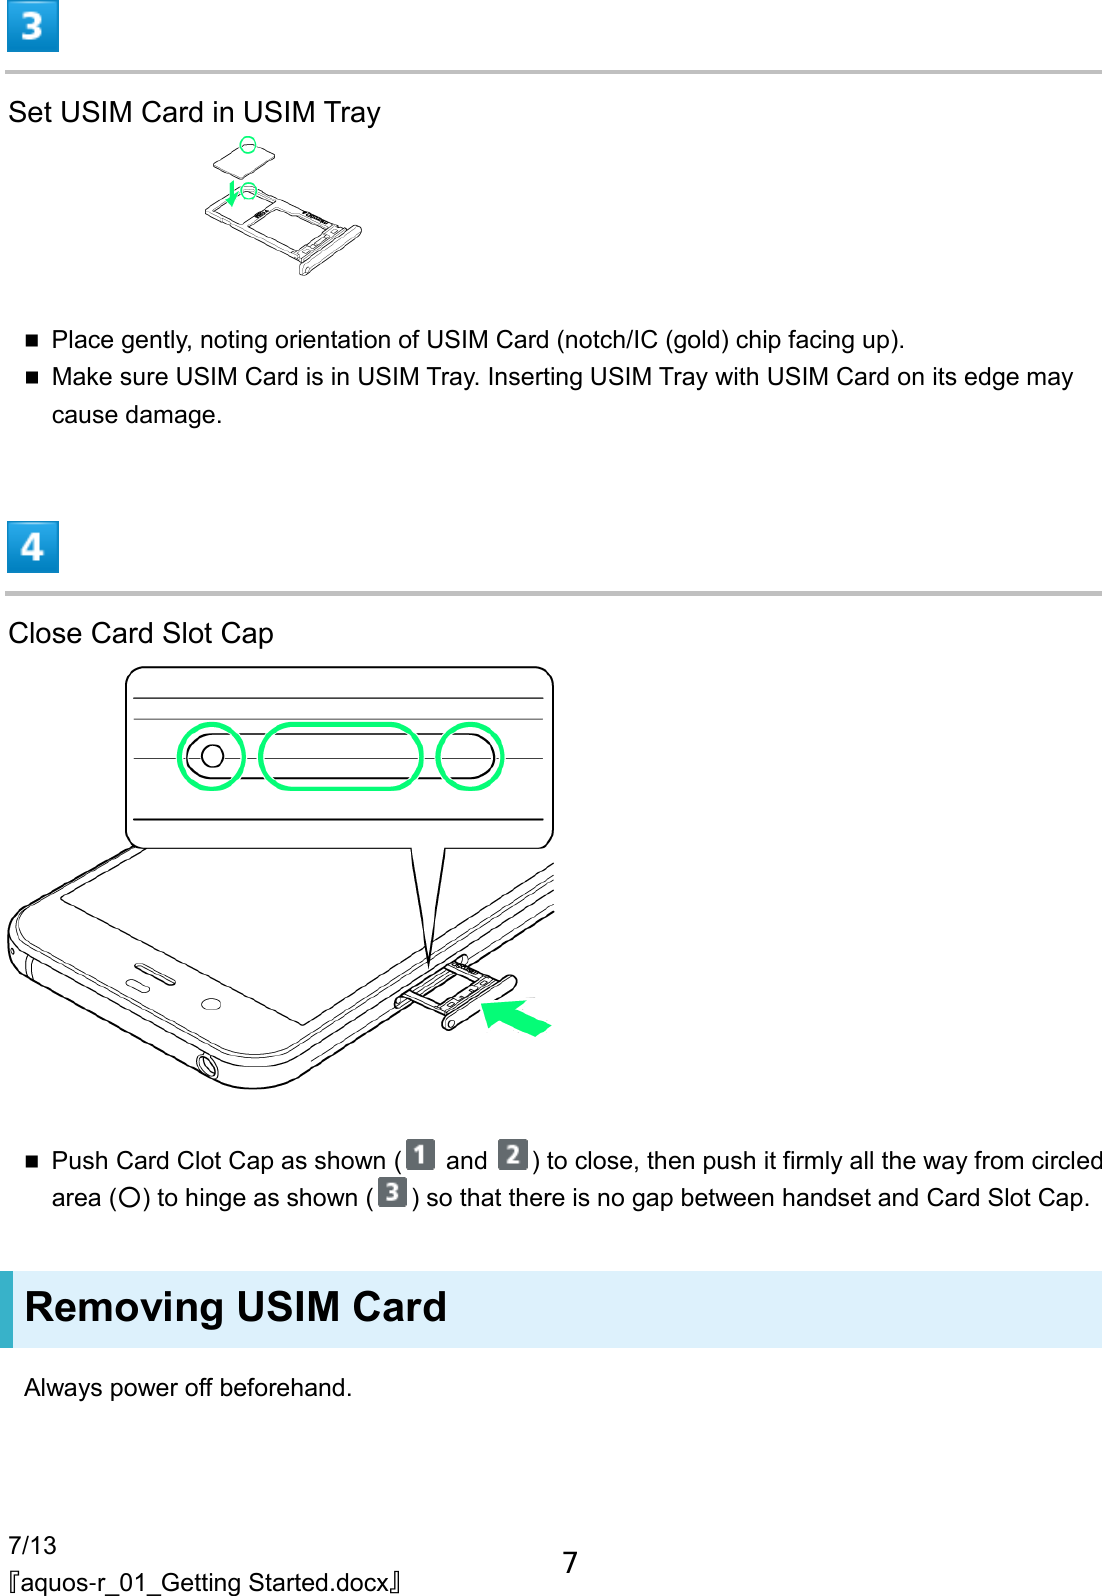 7/13 『aquos-r_01_Getting Started.docx』  Set USIM Card in USIM Tray   Place gently, noting orientation of USIM Card (notch/IC (gold) chip facing up).  Make sure USIM Card is in USIM Tray. Inserting USIM Tray with USIM Card on its edge may cause damage.  Close Card Slot Cap   Push Card Clot Cap as shown (  and  ) to close, then push it firmly all the way from circled area (○) to hinge as shown ( ) so that there is no gap between handset and Card Slot Cap. Removing USIM Card Always power off beforehand. 7